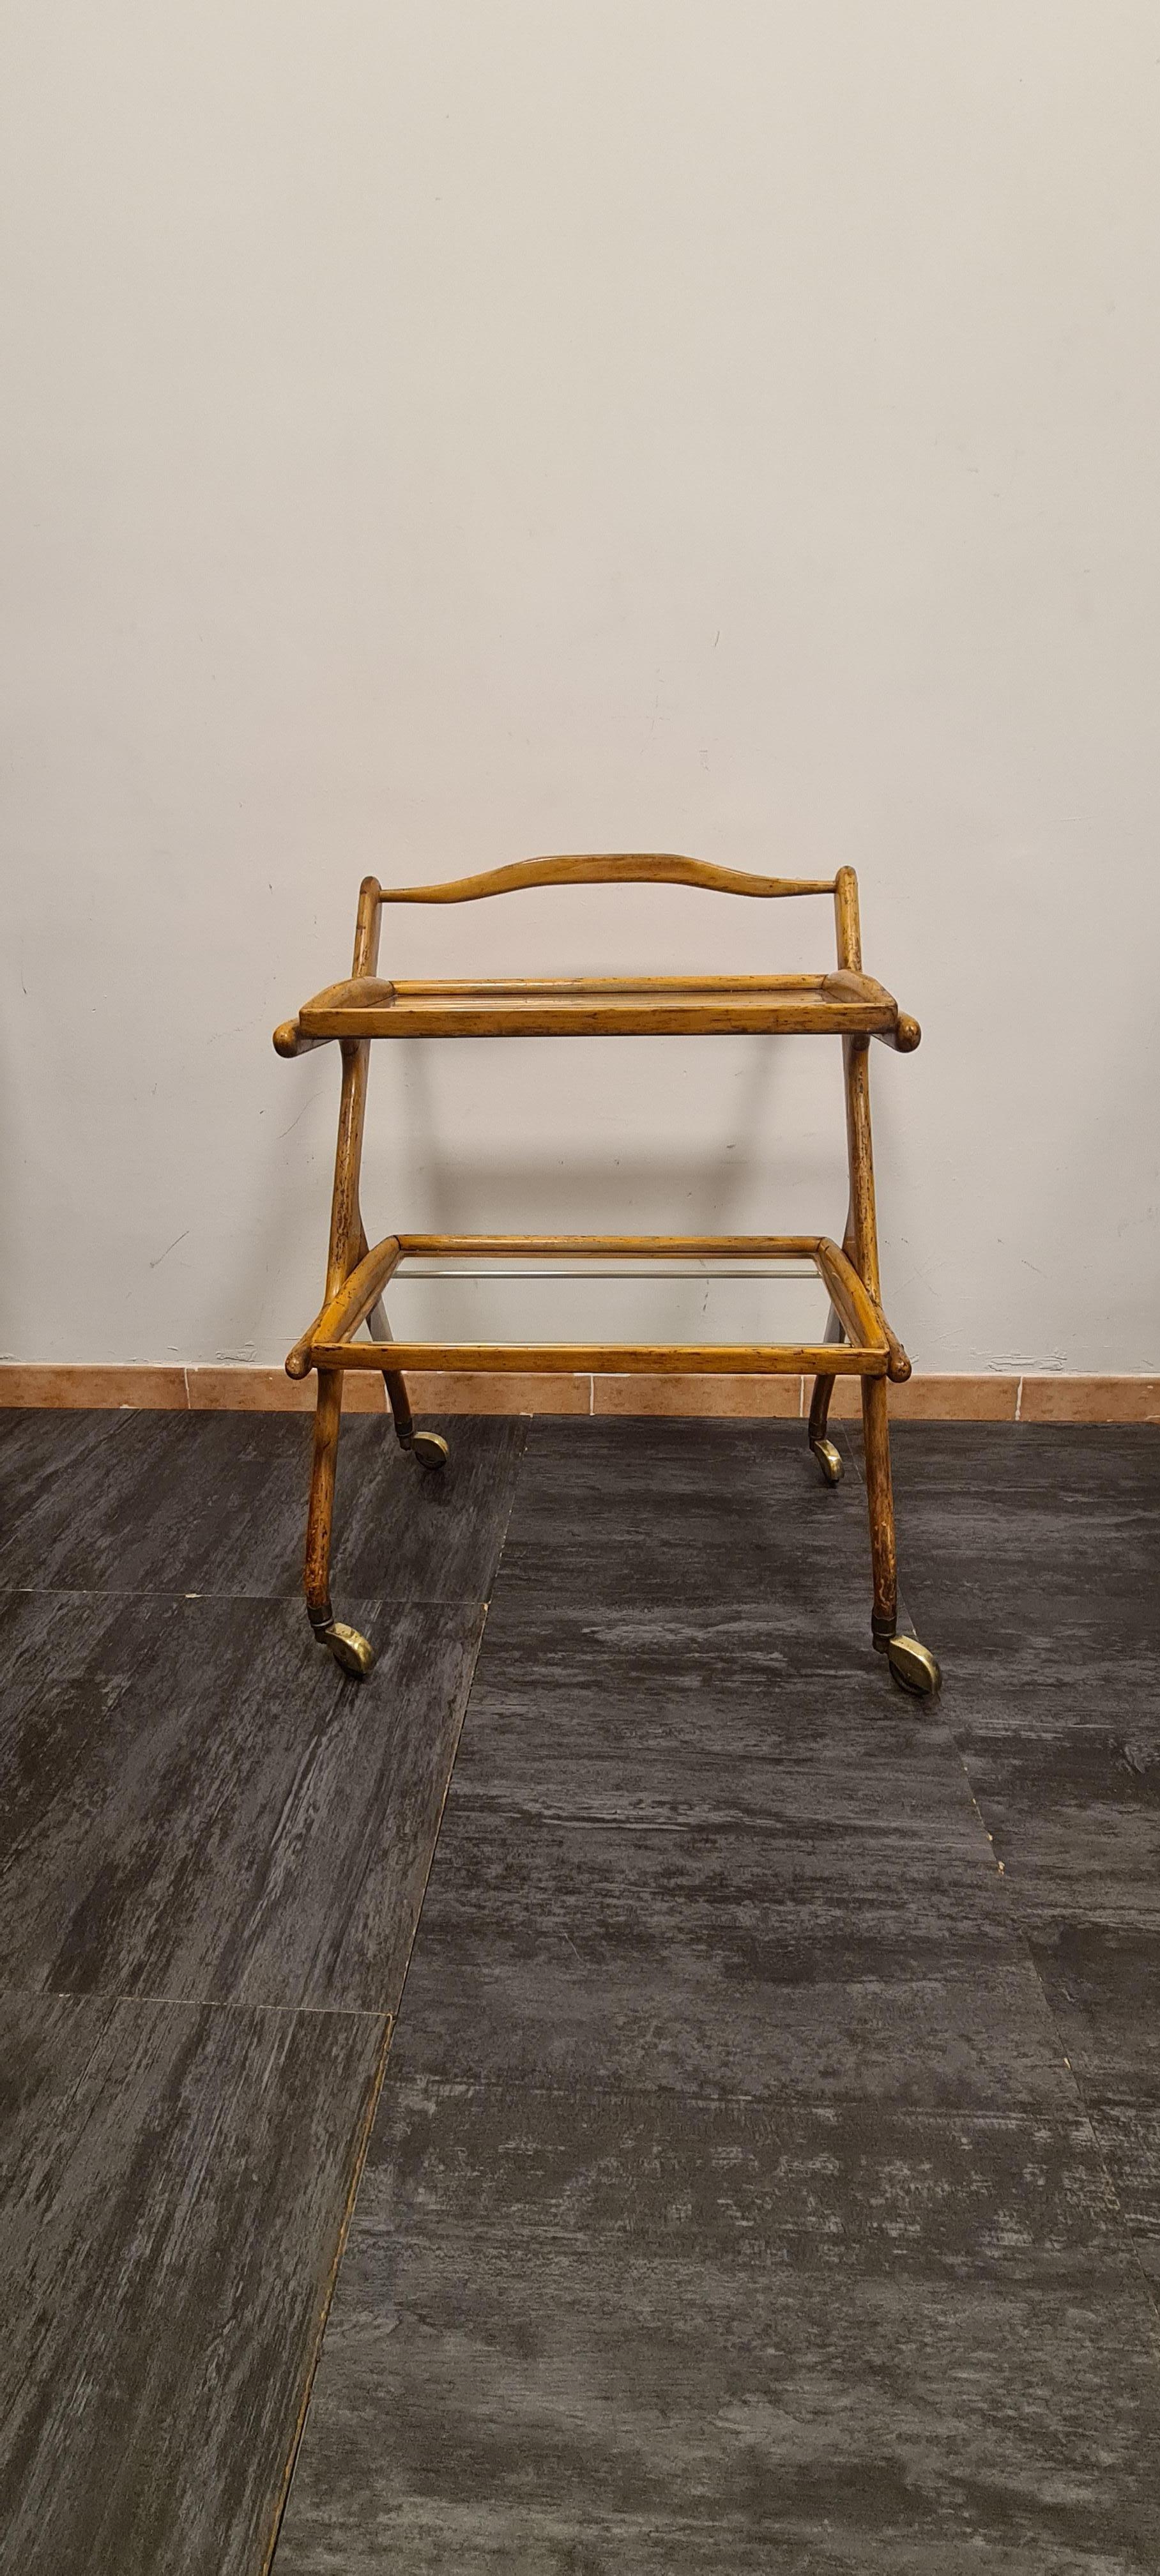 Ash cart with pull-out trays by designer Cesare Lacca.

Refined trolley with slender and very light structure with sinuous shapes made of ash wood with brass details.

The trolley has two tops composed of two trays with wooden edging and glass top